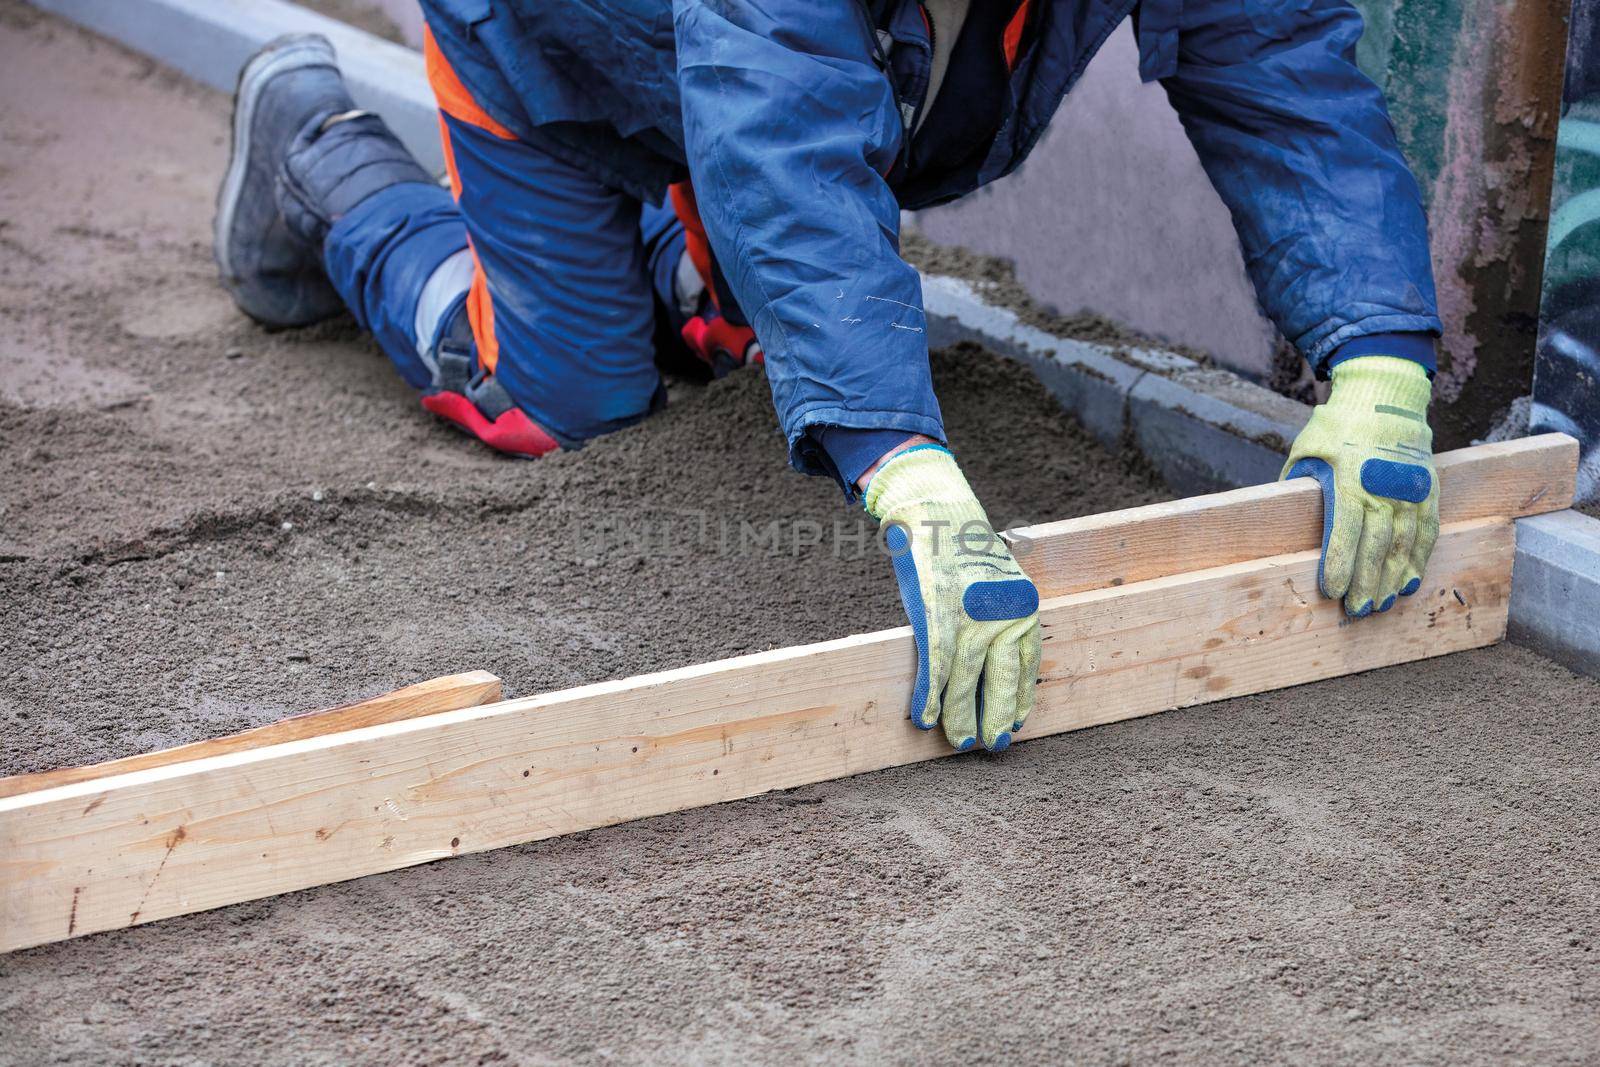 A worker in a blue overalls squats to level the sandy foundation with a wooden level to continue the paving slabs, copy space image, selective focus.